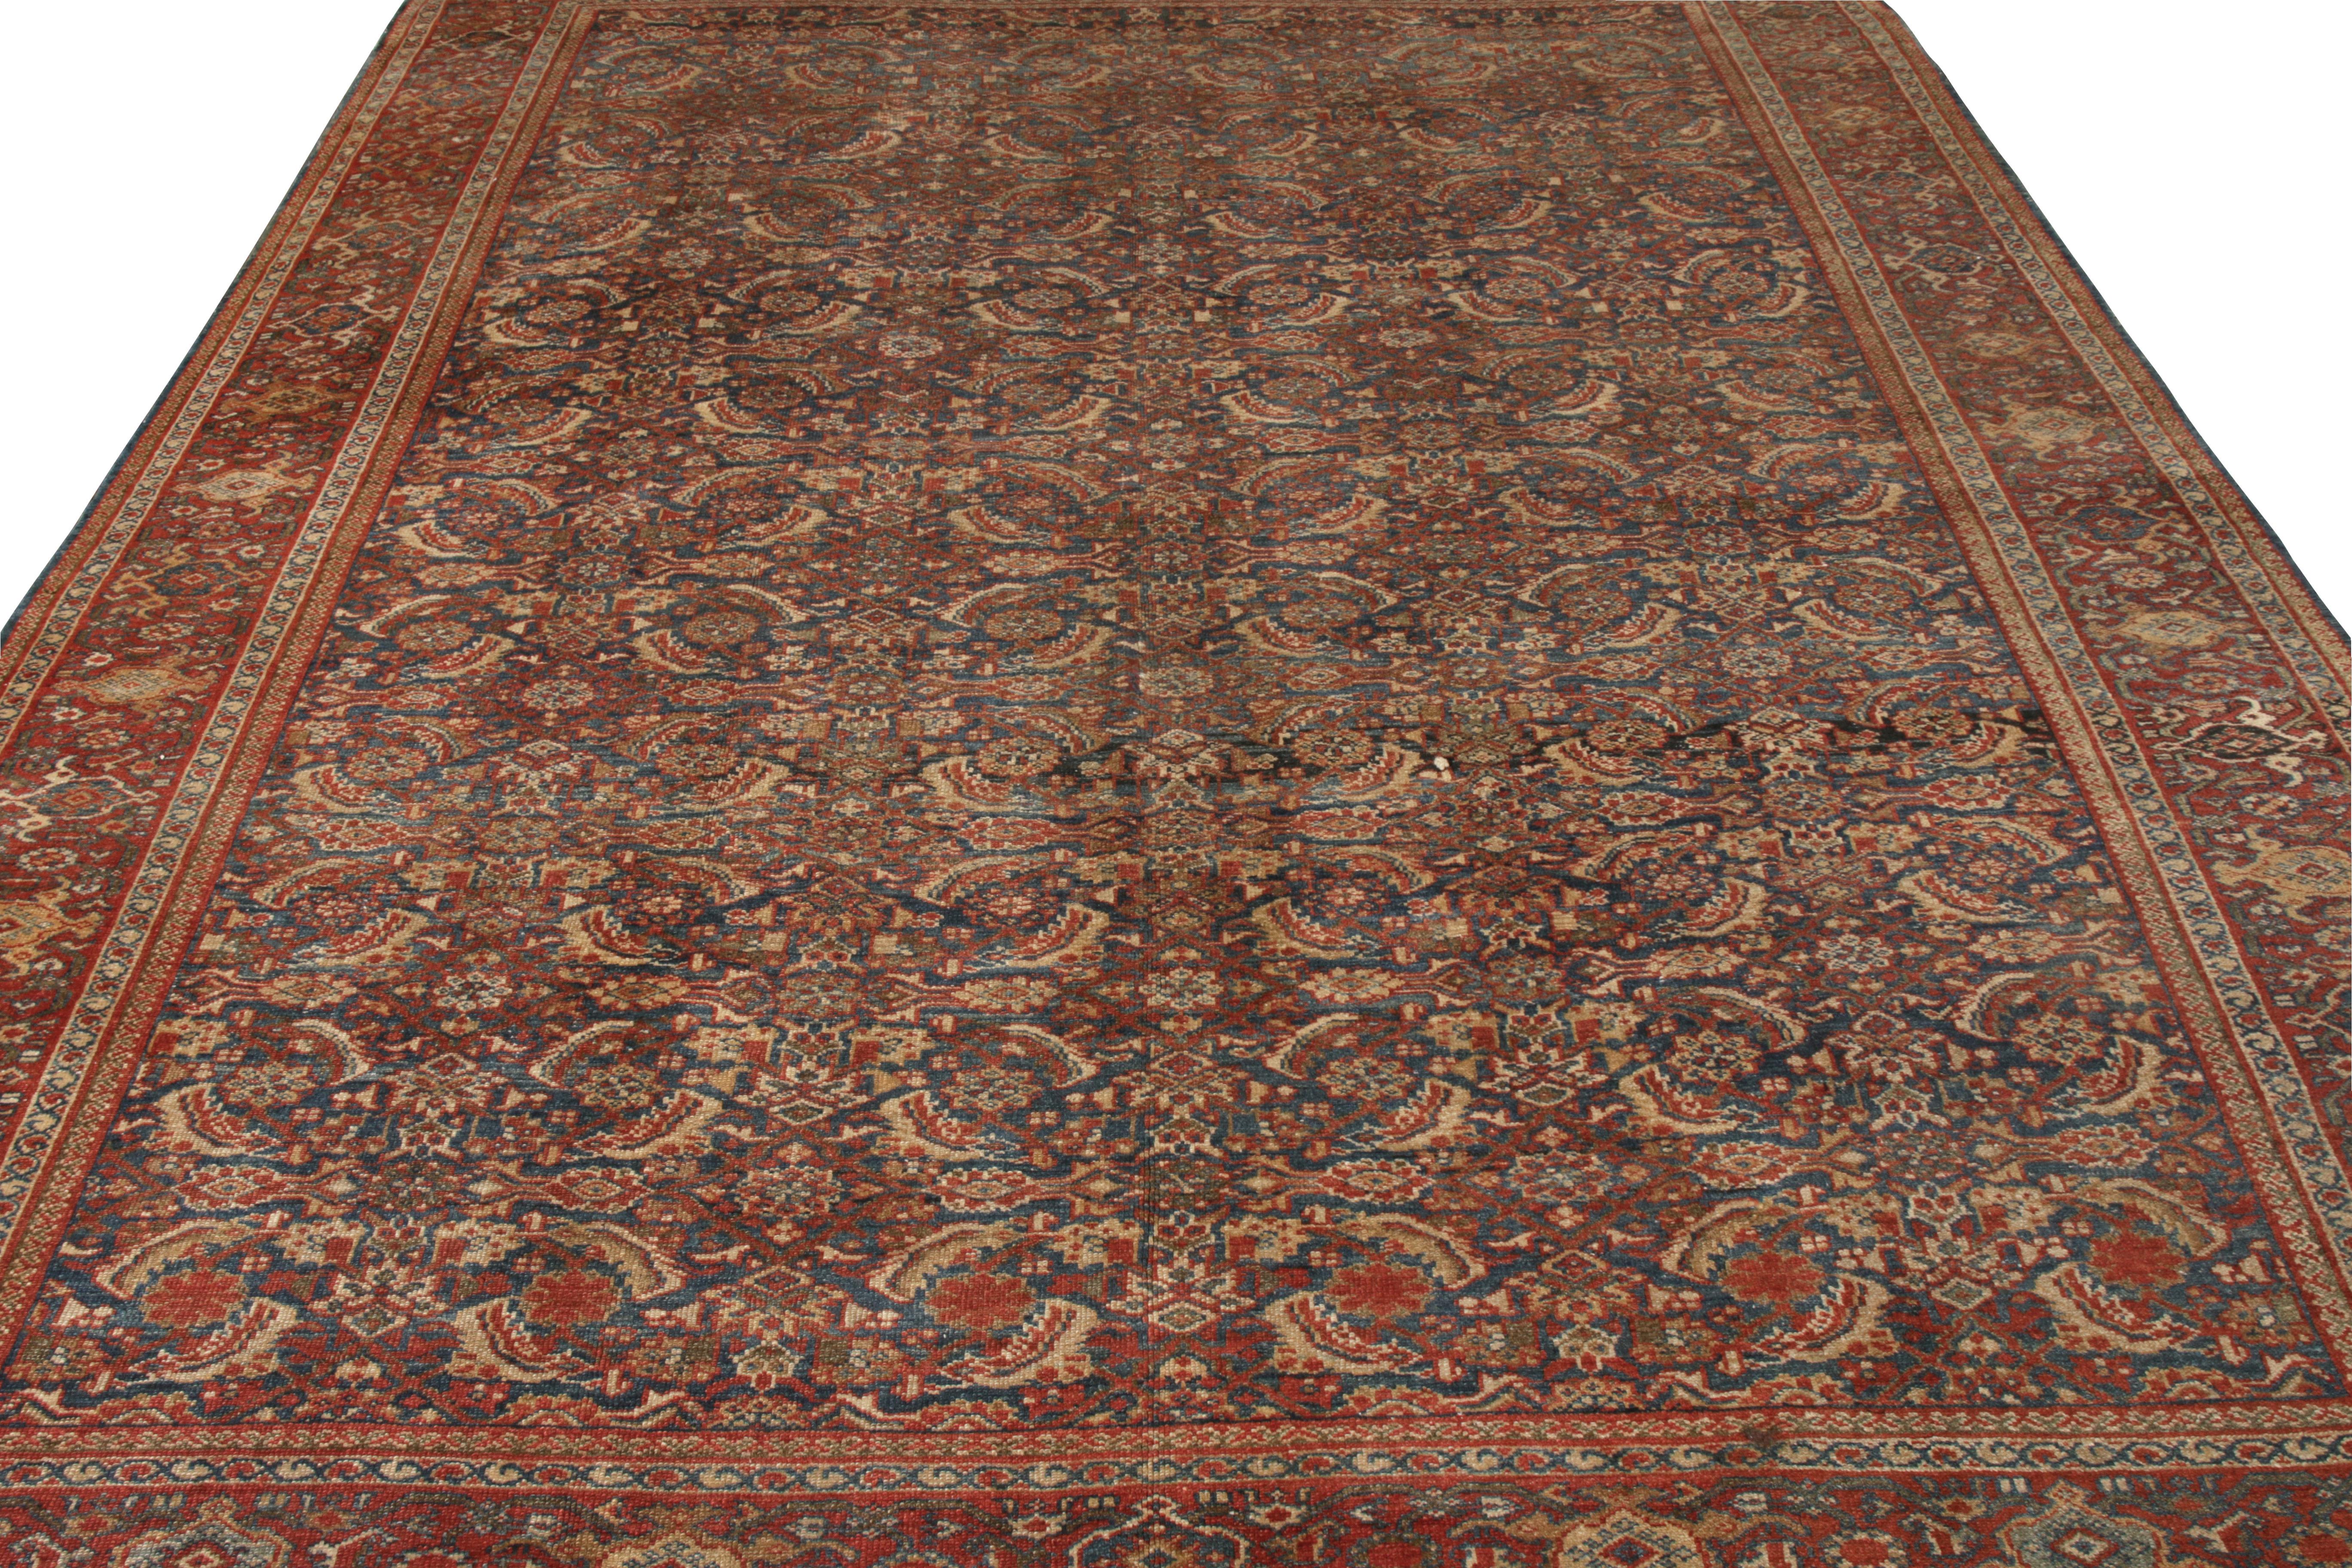 A 9x10 addition to Rug & Kilim’s Antique and Vintage collection. Hand-knotted in wool, this antique Persian Sultanabad rug boasts an all over Herati floral pattern that transitions majestically in red and beige-brown, tastefully punctuated by hues